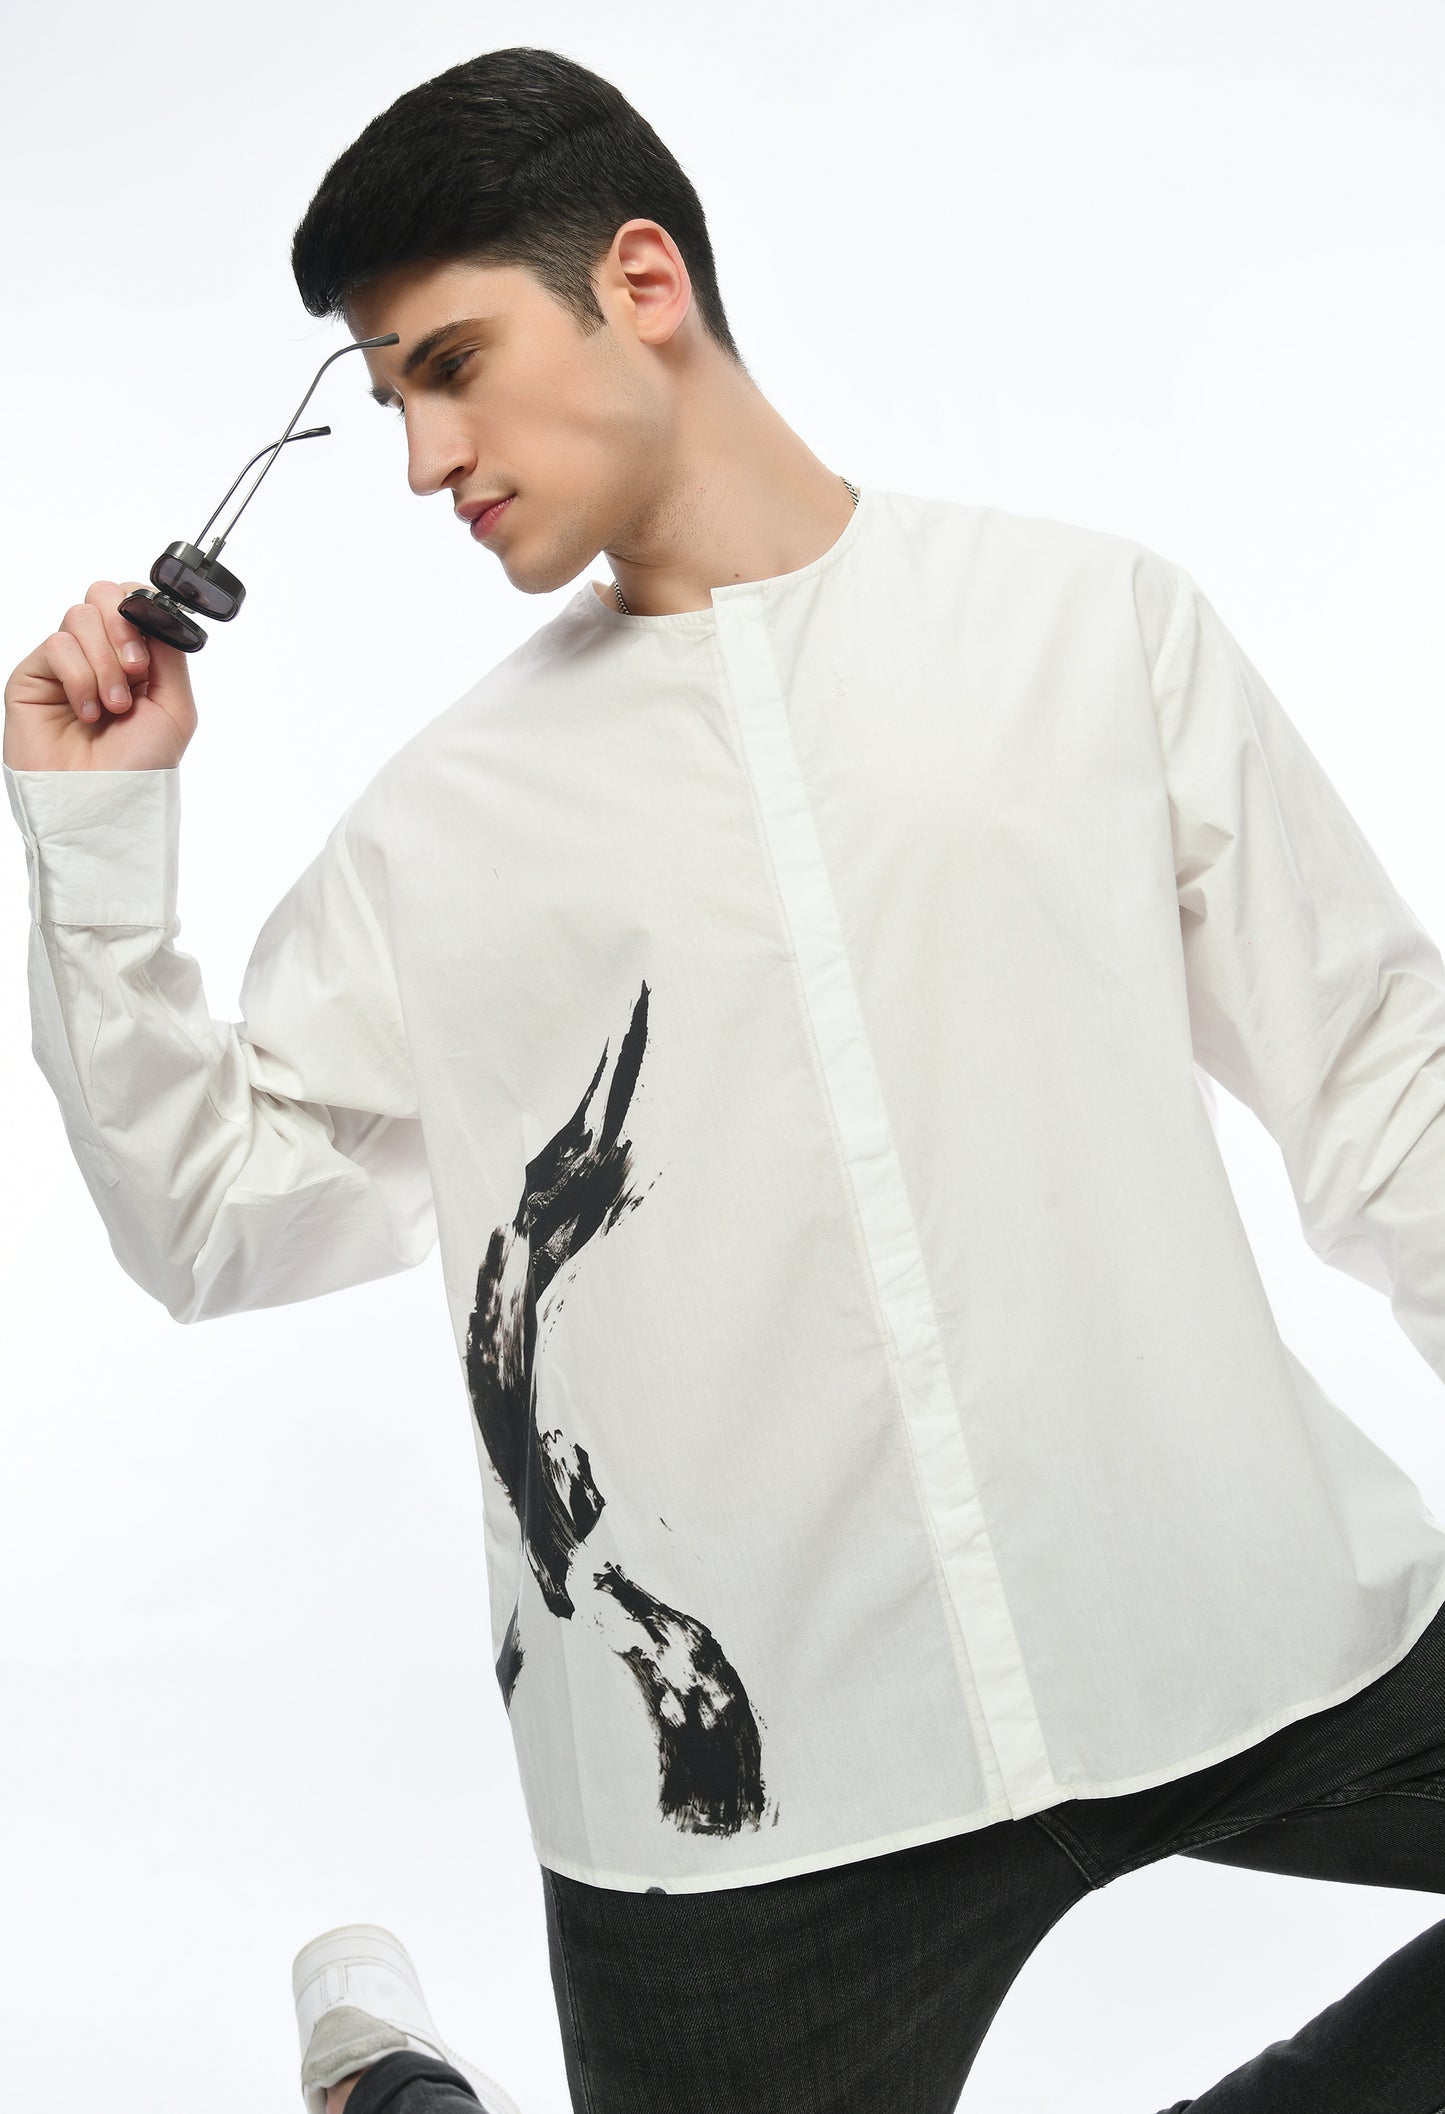 White, stylish,lose-fit, cotton shirt with digital print on it